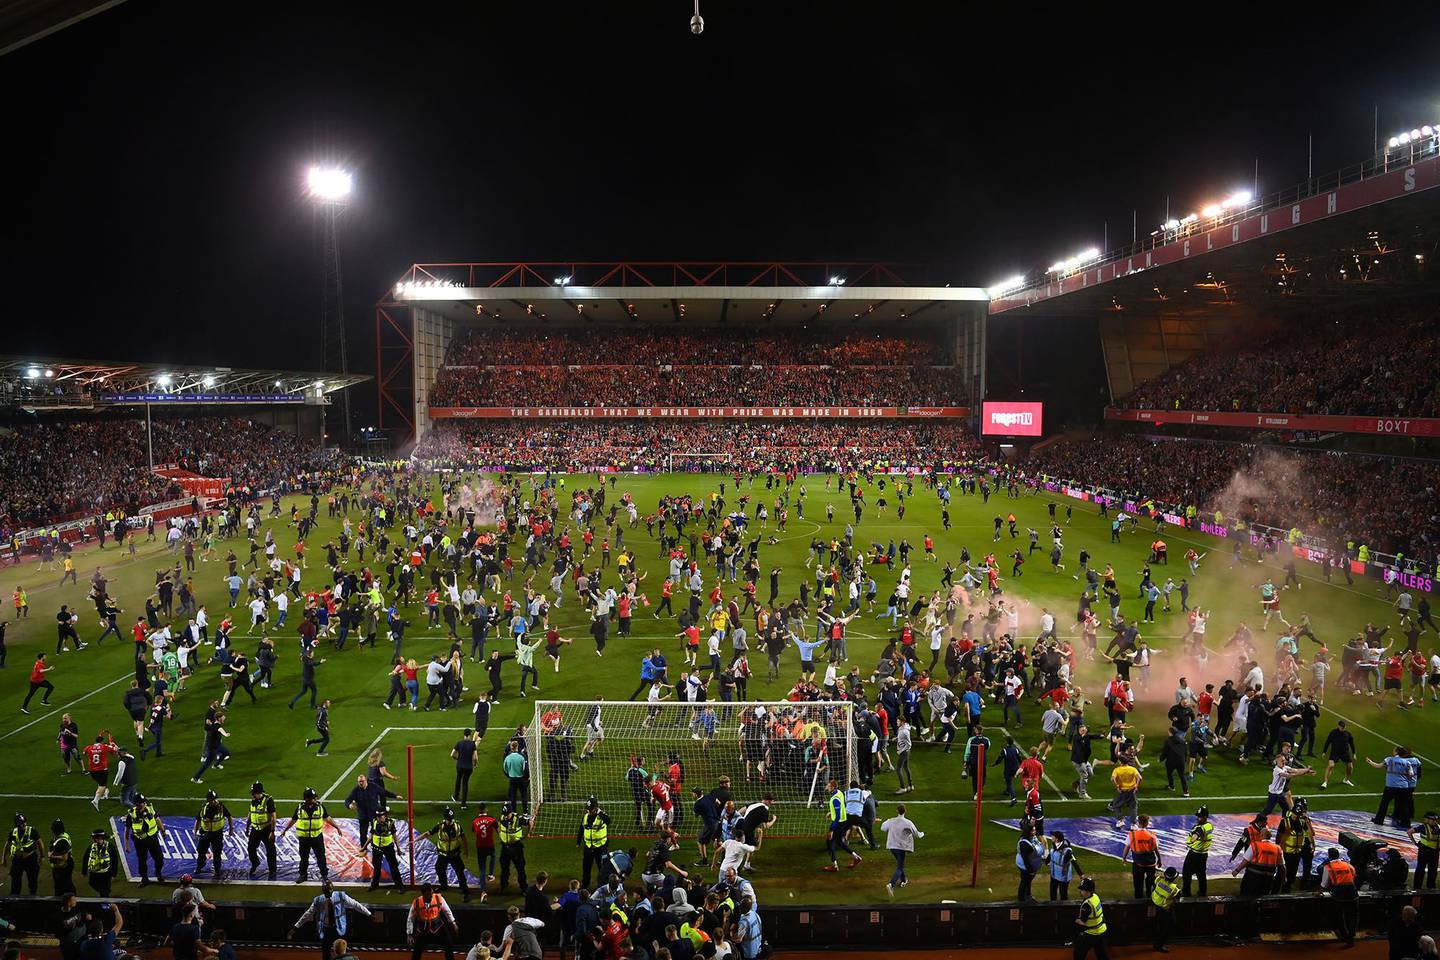 Nottingham Forest fans invade the pitch after securing their place in the final by beating Sheffield United at City Ground in Nottingham, UK on May 17. Photographer: Michael Regan/Getty Imagesdfd